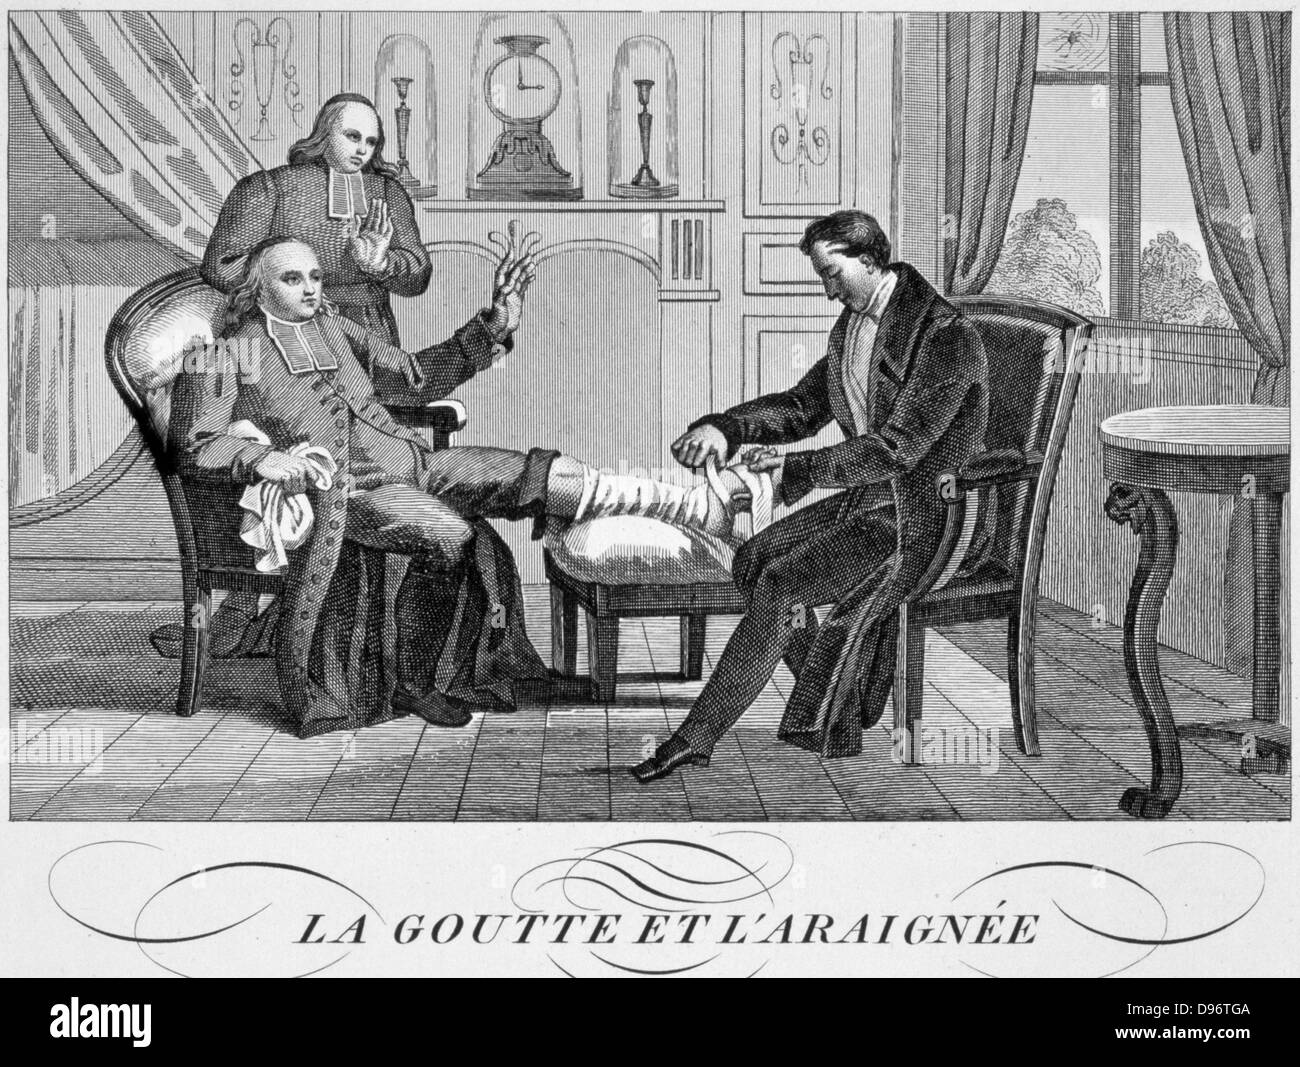 Physician attending a gouty clerical patient. Illustration for 'Gout and the Spider' from a French edition of La Fontaine 'Fables' published c1835. Stock Photo